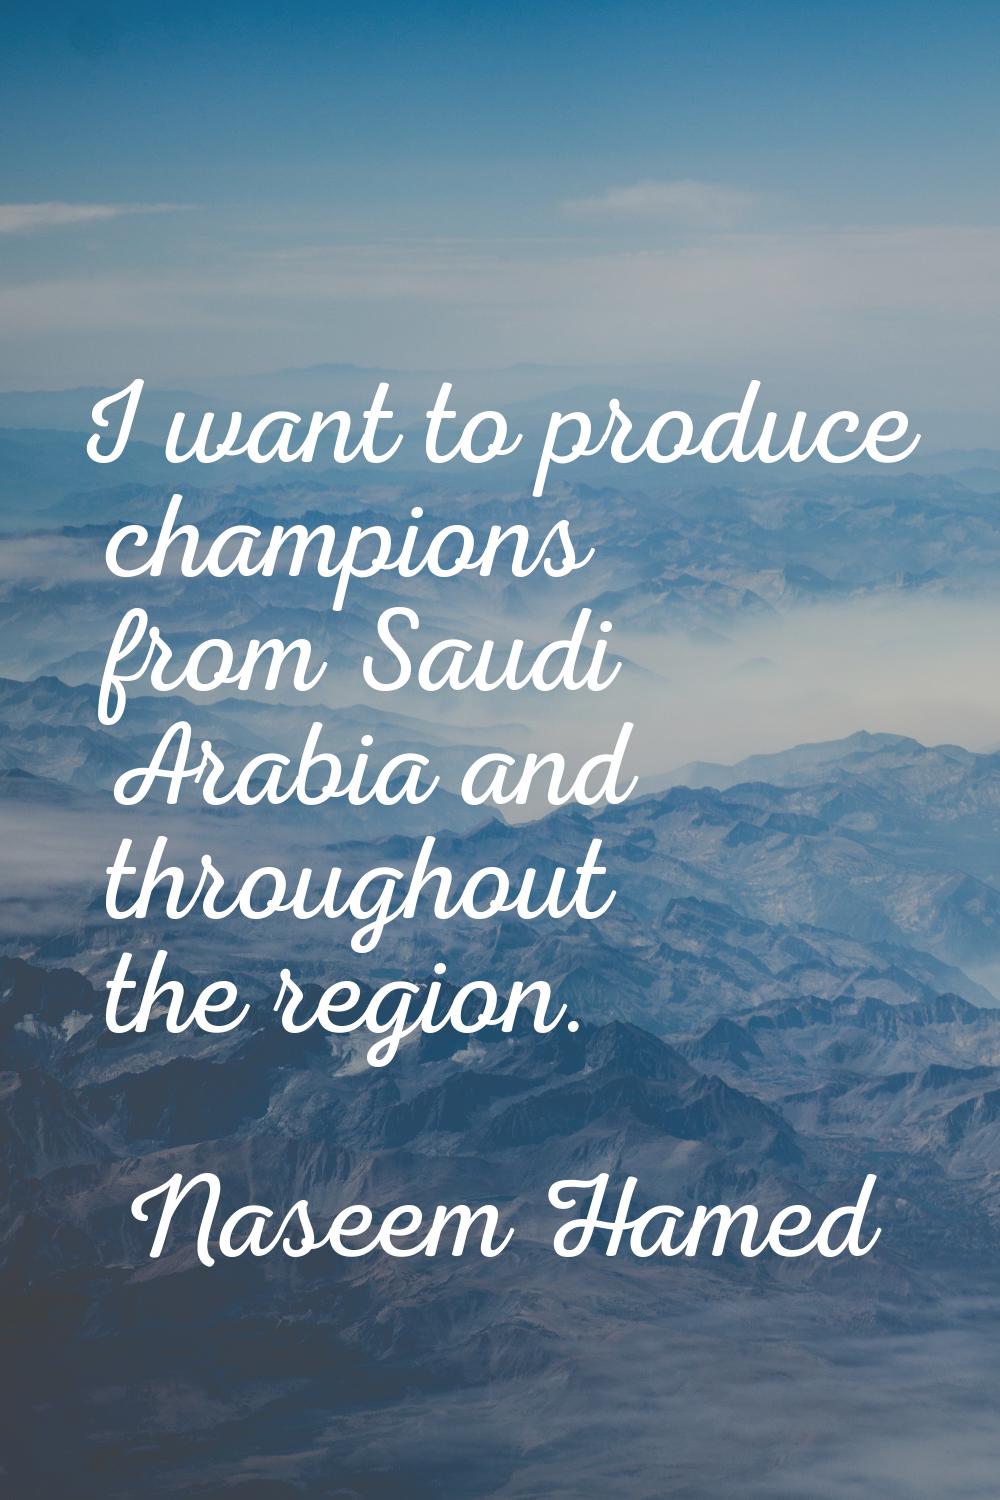 I want to produce champions from Saudi Arabia and throughout the region.